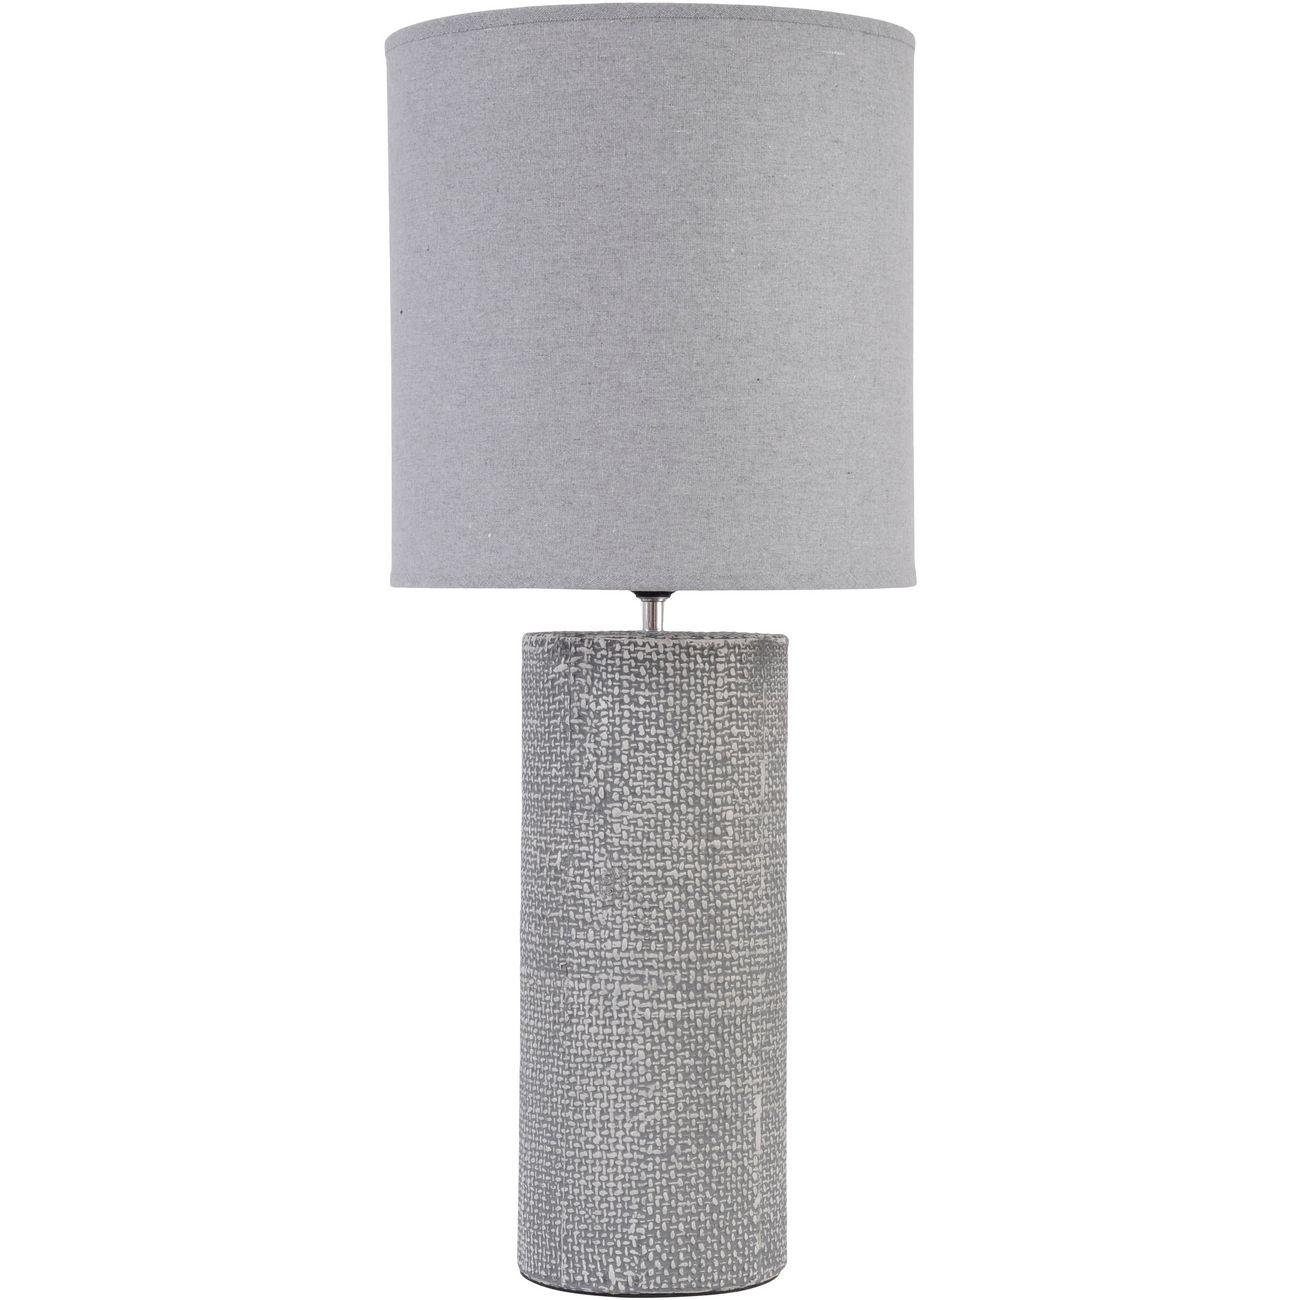 Textured Porcelain Lamp with Shade